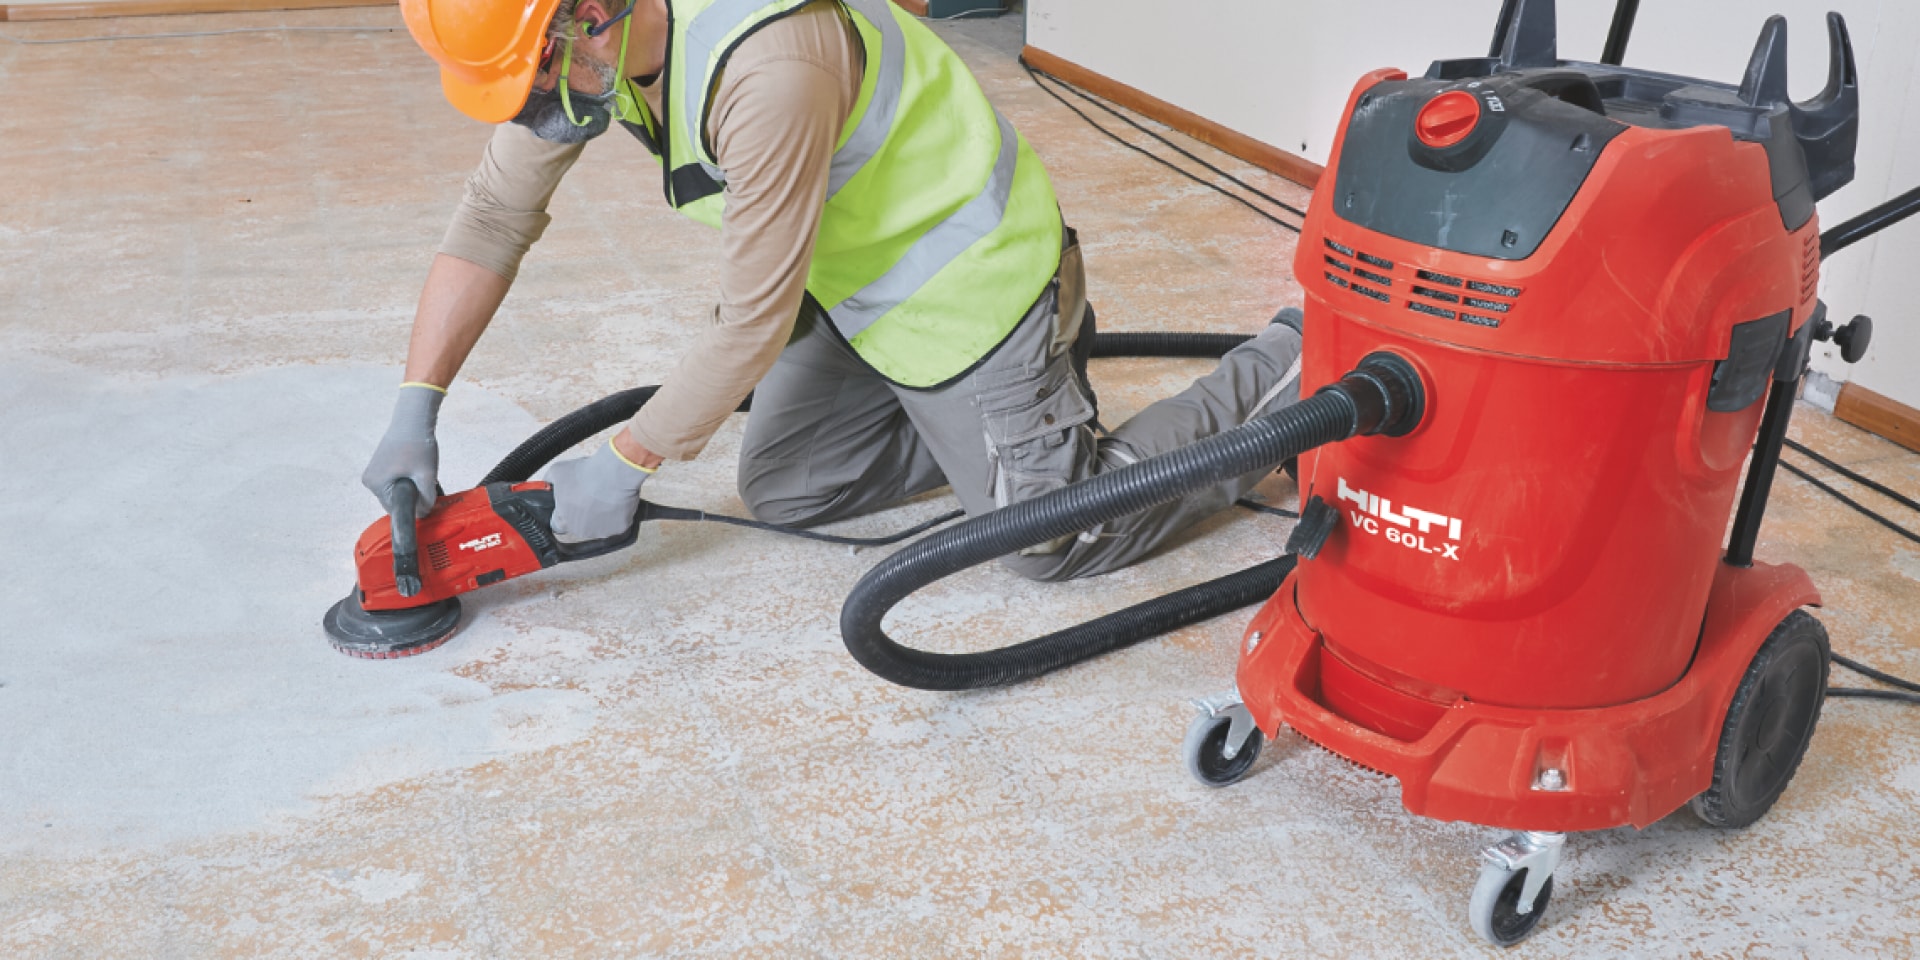 For virtually dust-free results combine tools like the DG 150 concrete grinder with a vacuum cleaner